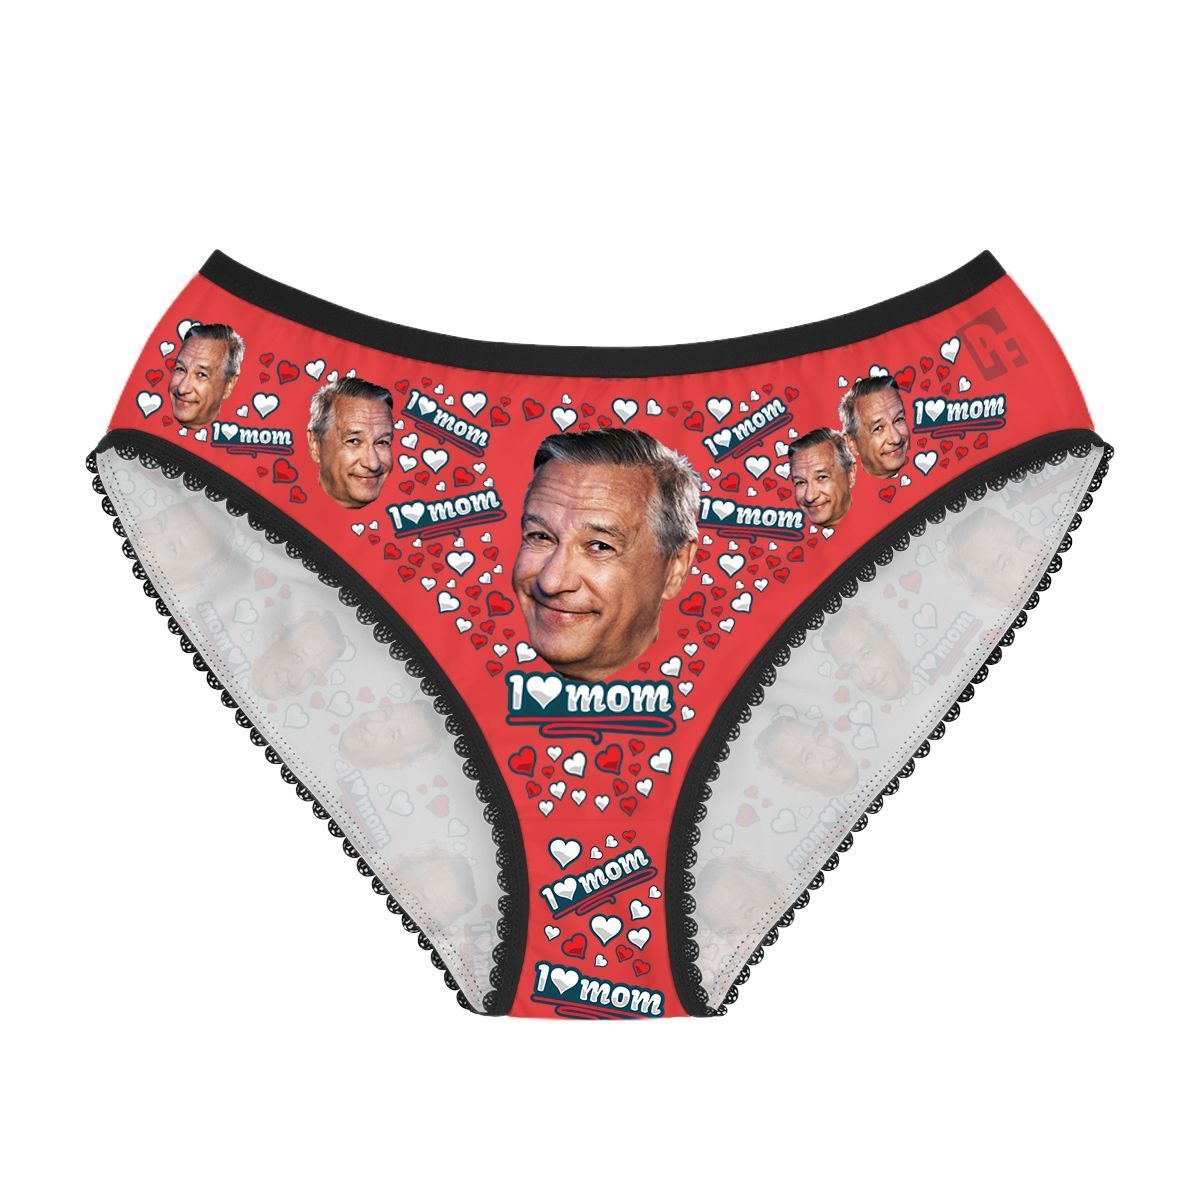 Red Love mom women's underwear briefs personalized with photo printed on them